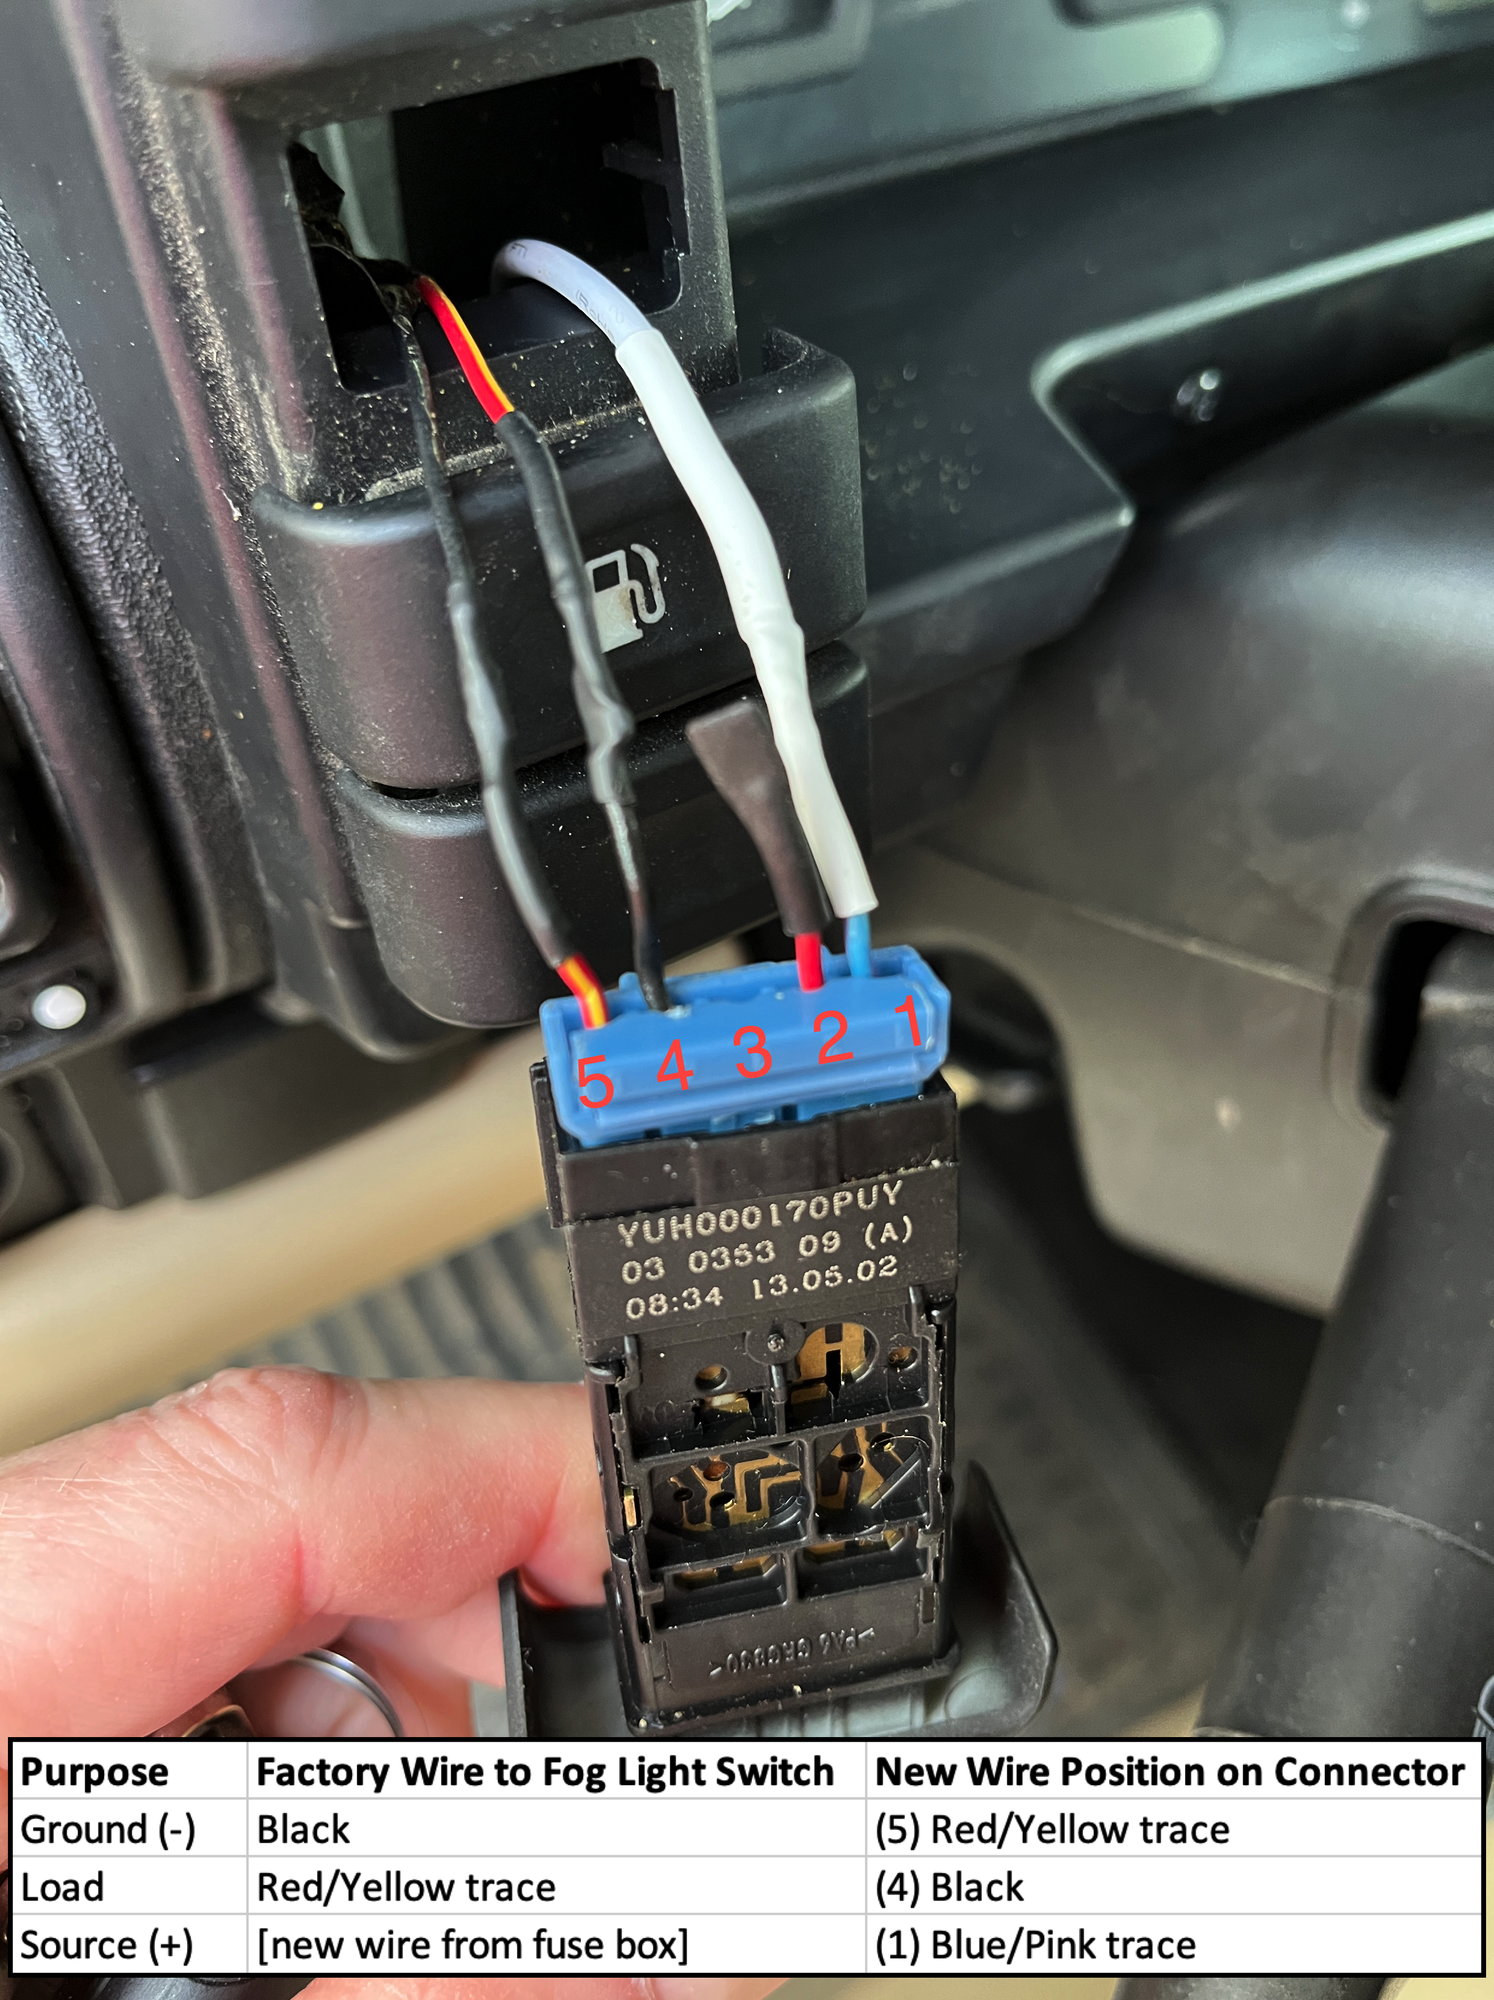 Rear Fog light switch - rewire for keyed power - Land Rover Forums - Land  Rover Enthusiast Forum